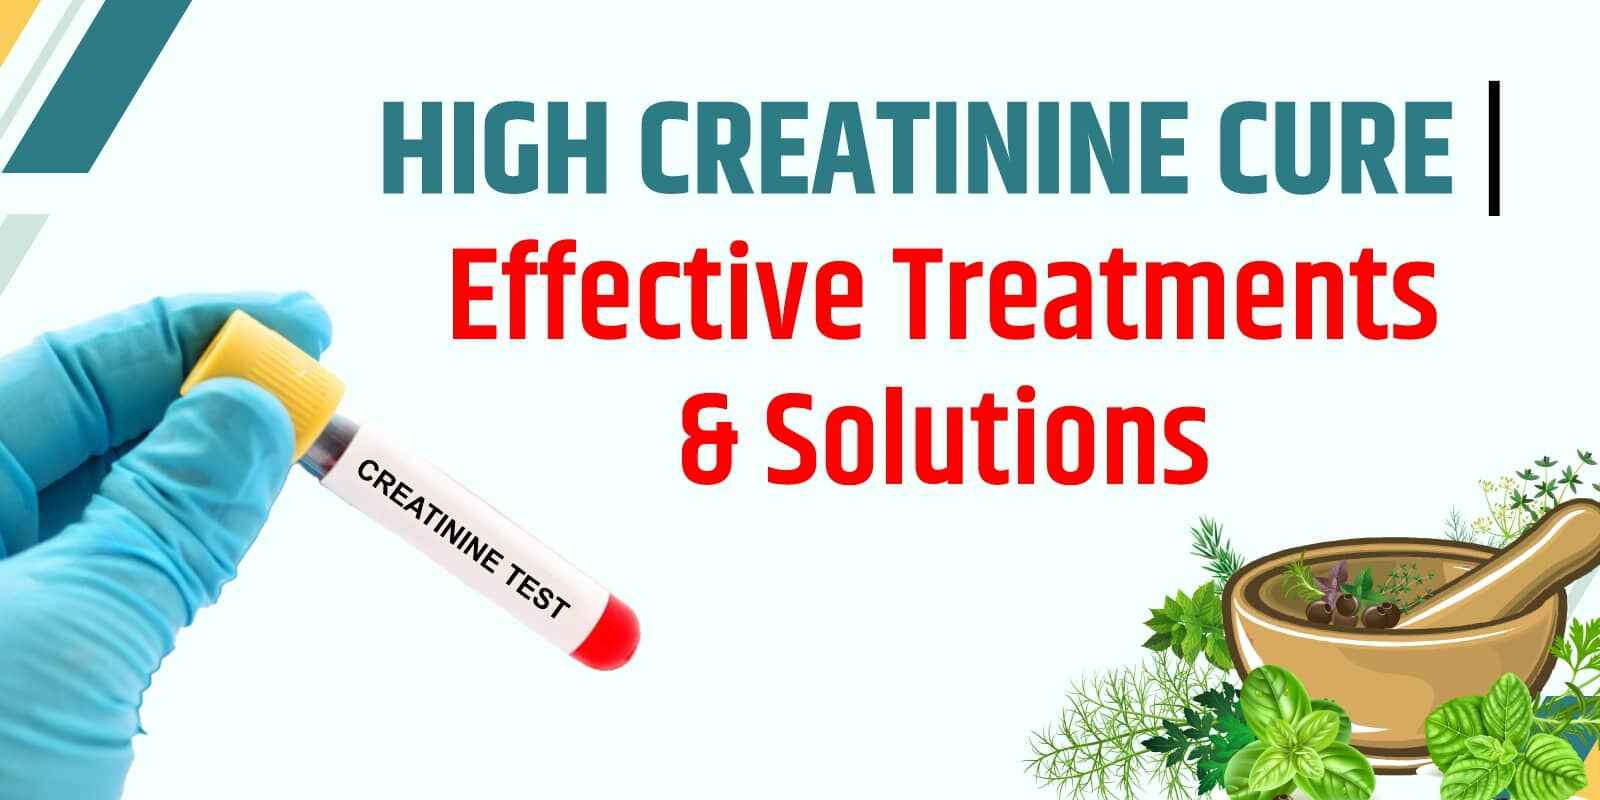 High Creatinine Cure | Effective Treatments & Solutions